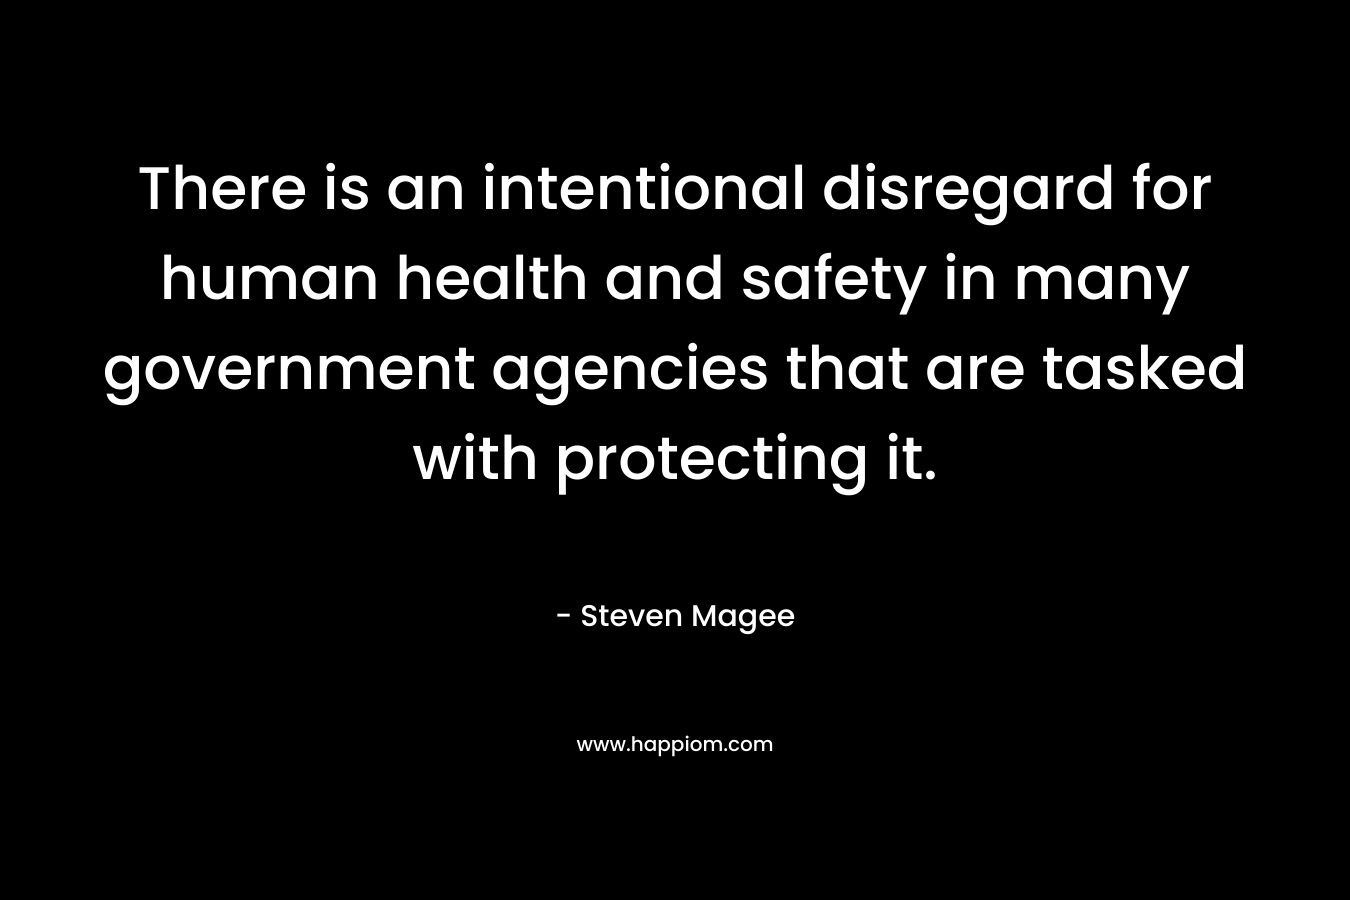 There is an intentional disregard for human health and safety in many government agencies that are tasked with protecting it. – Steven Magee